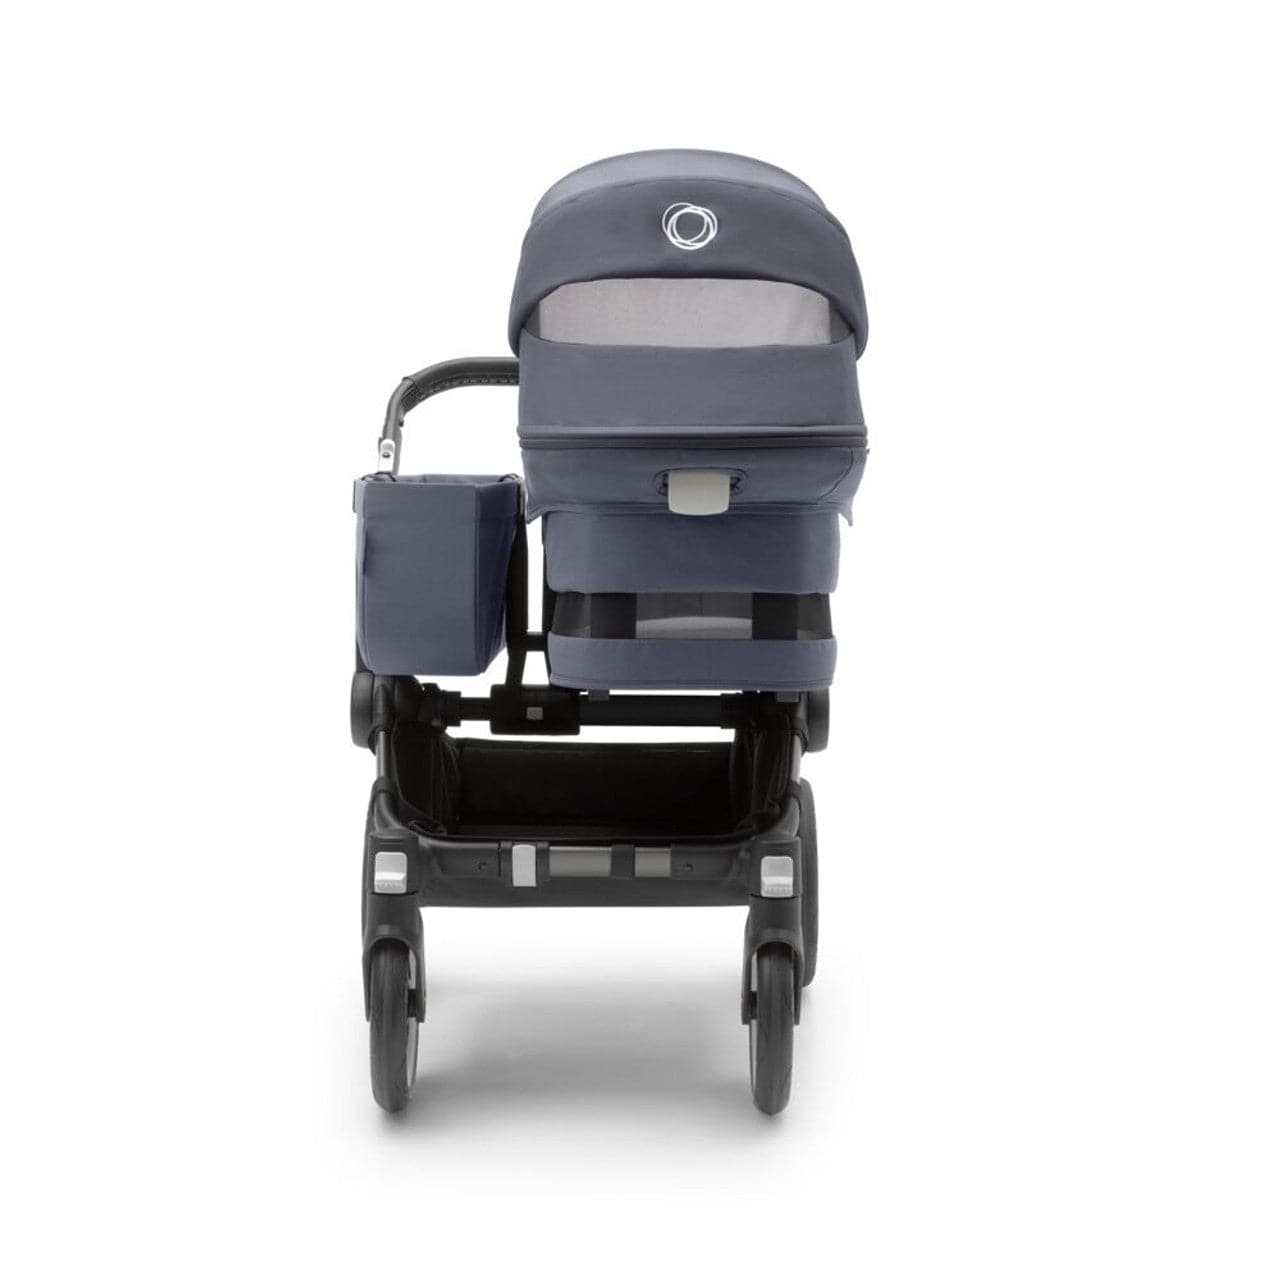 Bugaboo Donkey 5 Twin Complete Travel System + Turtle Air - Graphite/Grey Melange -  | For Your Little One